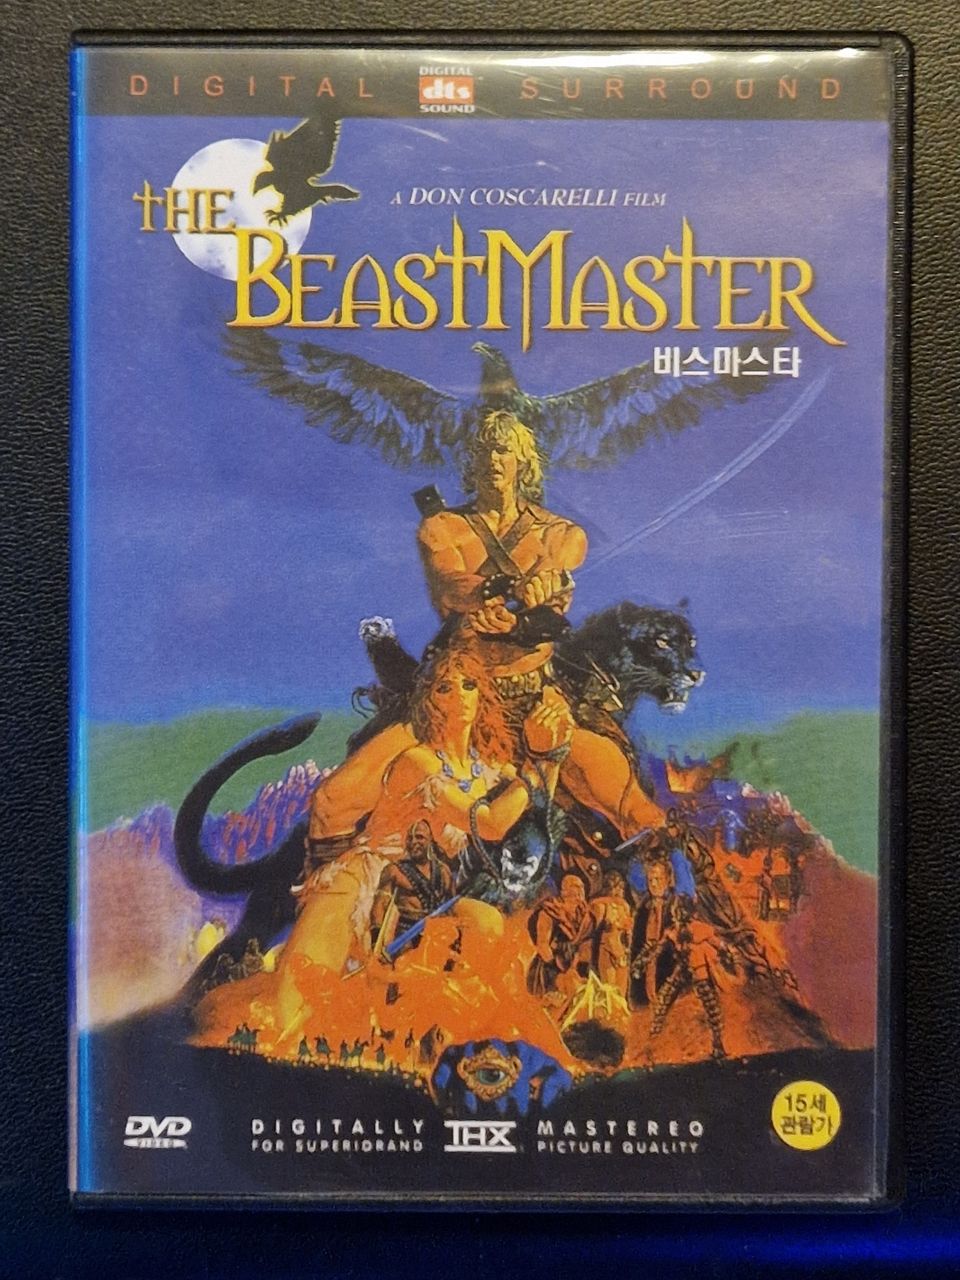 The Beastmaster - R1 DVD